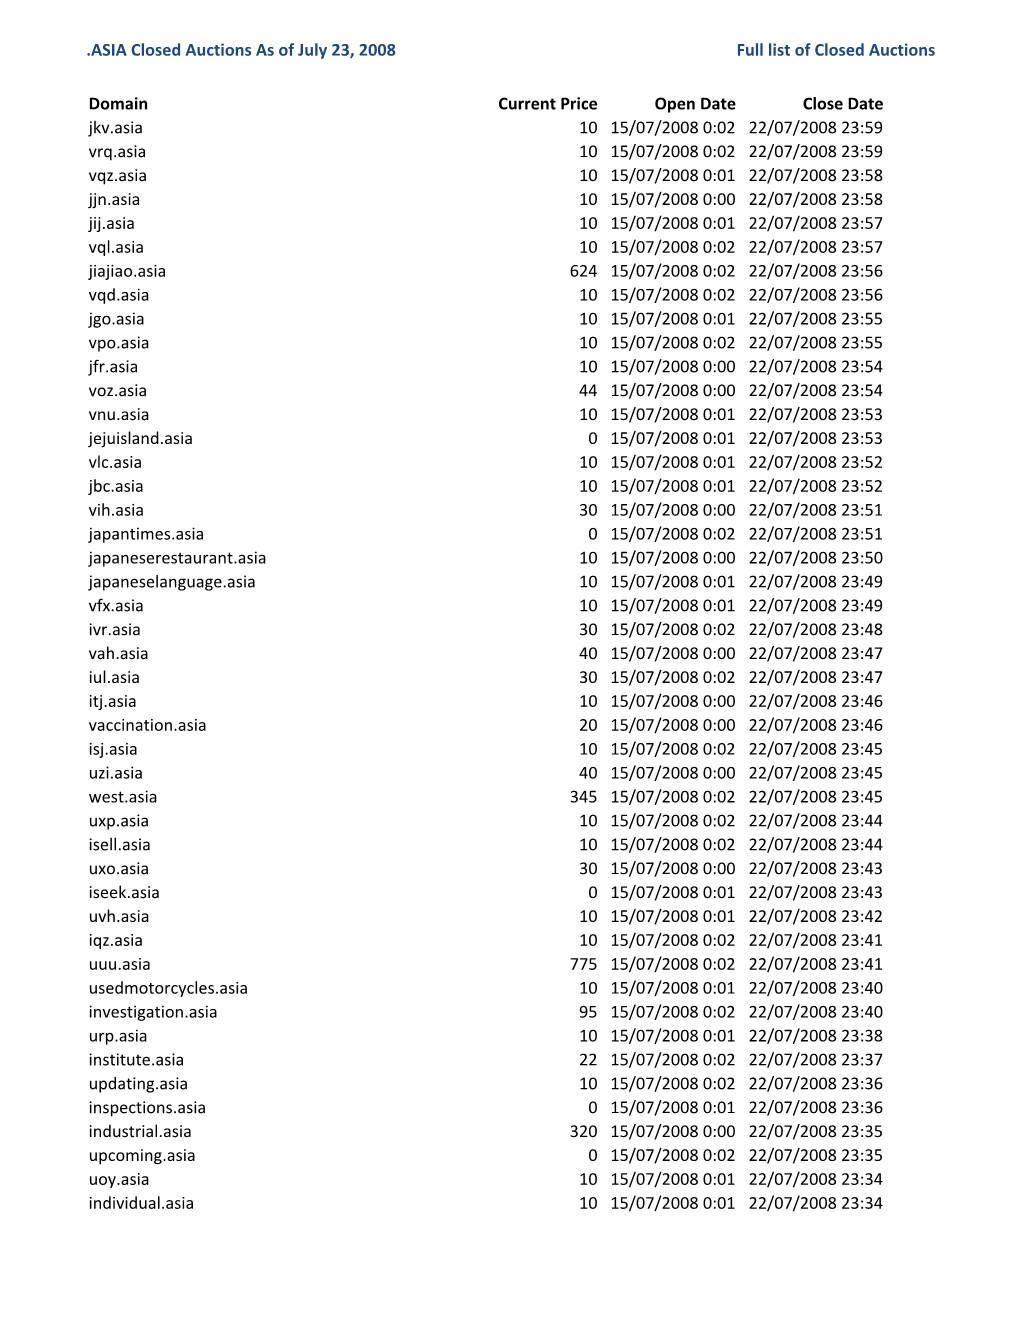 ASIA Closed Auctions As of July 23, 2008 Full List of Closed Auctions